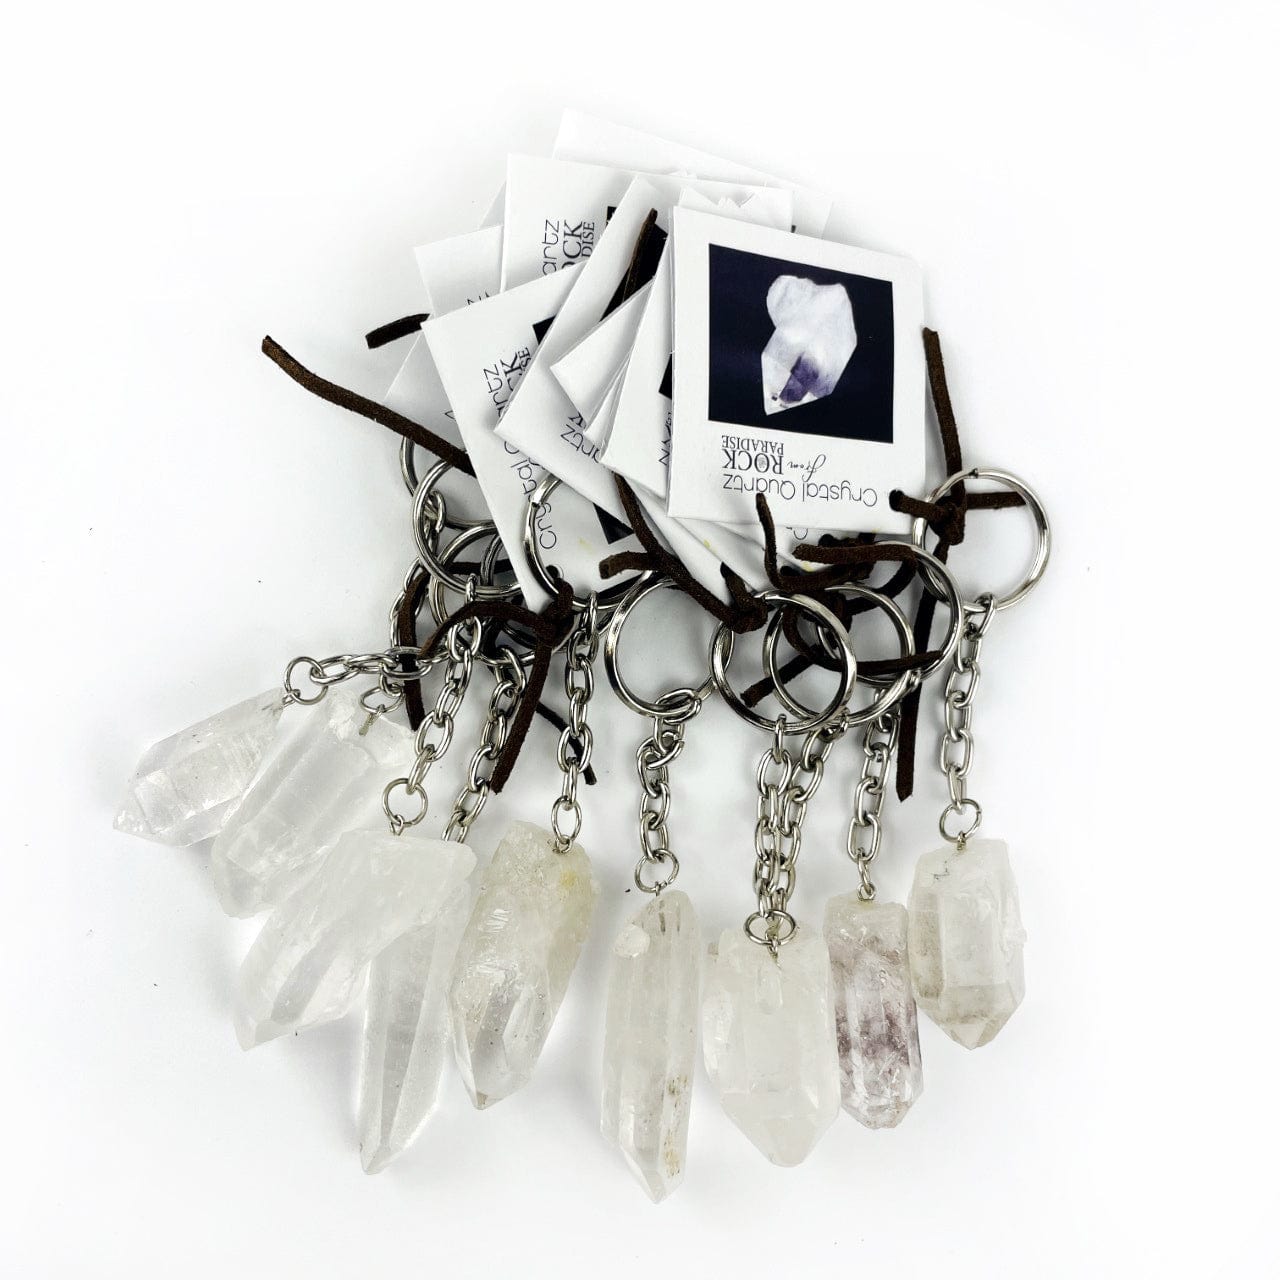 A collection of 10 Quartz crystal Point Keychains with tags tied on them